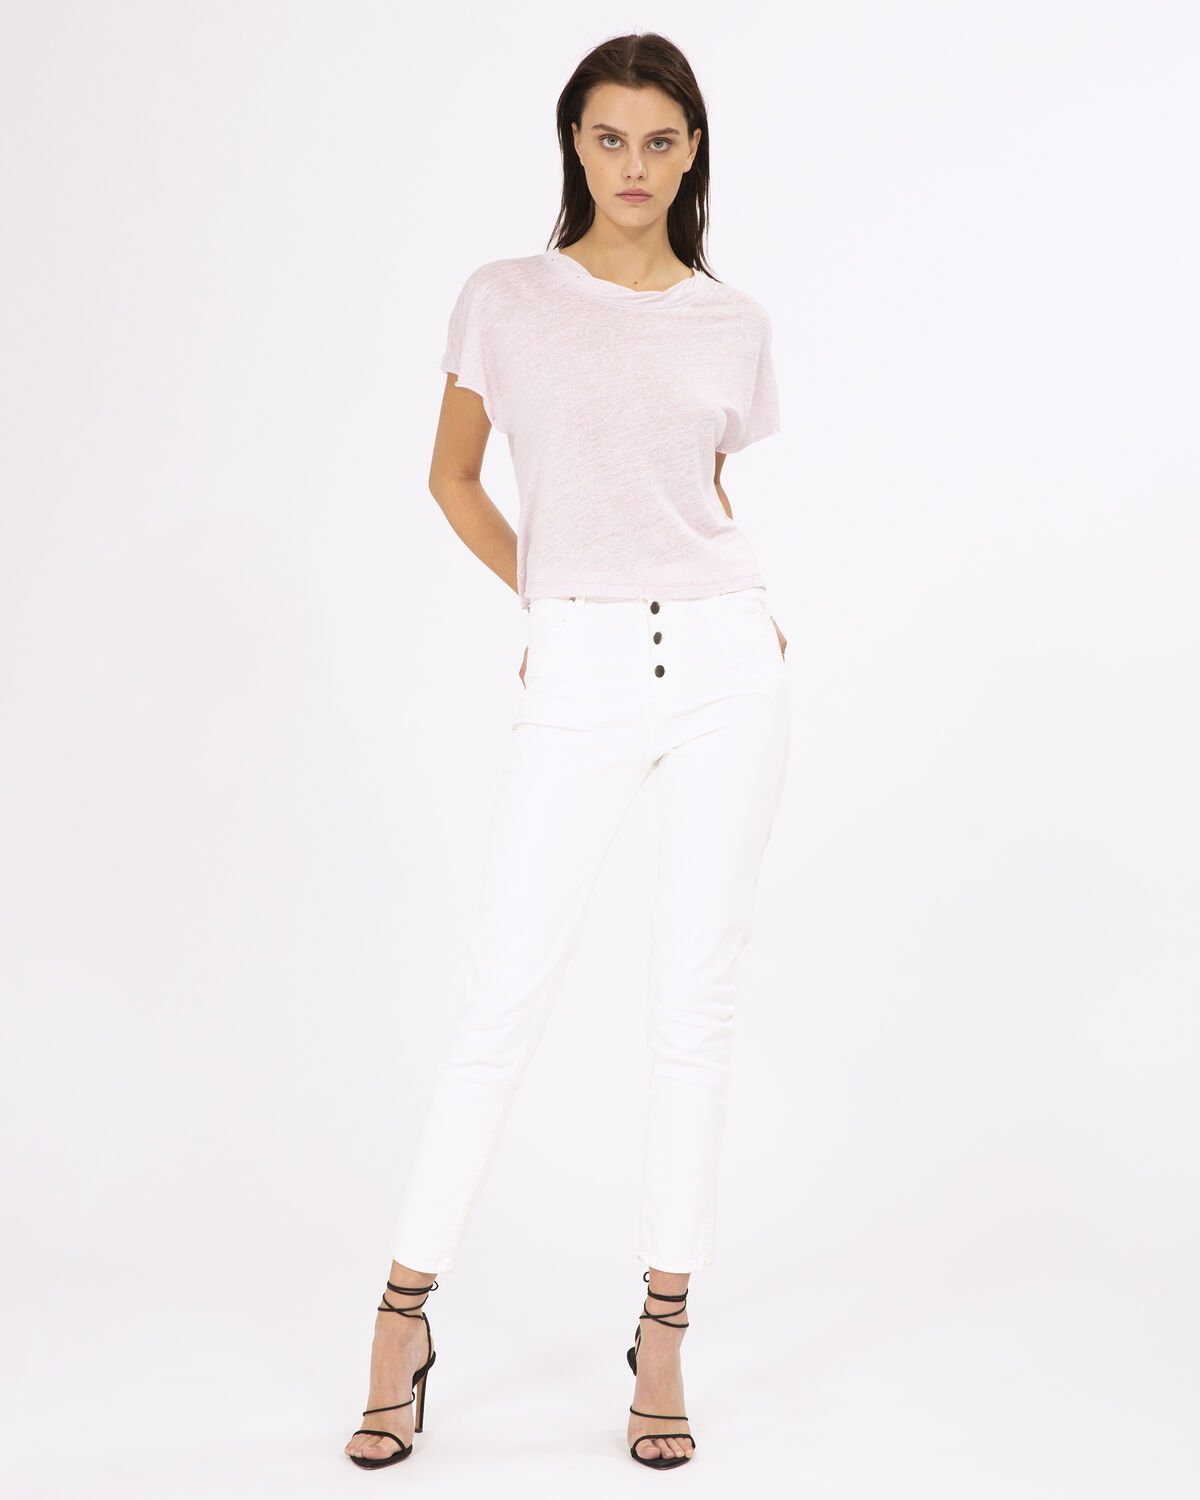 Photo of IRO Paris Rugged T-Shirt Blush Pink - This Short Linen Top Is Distinguished By Its Worked And Frayed Edges. Its Plus? Its Sleeves Are Adjustable With A Button To Fold Them Up. Wear It With Grey Jeans And A Pair Of Pumps For A Resolutely Modern Look. Spring Summer 19